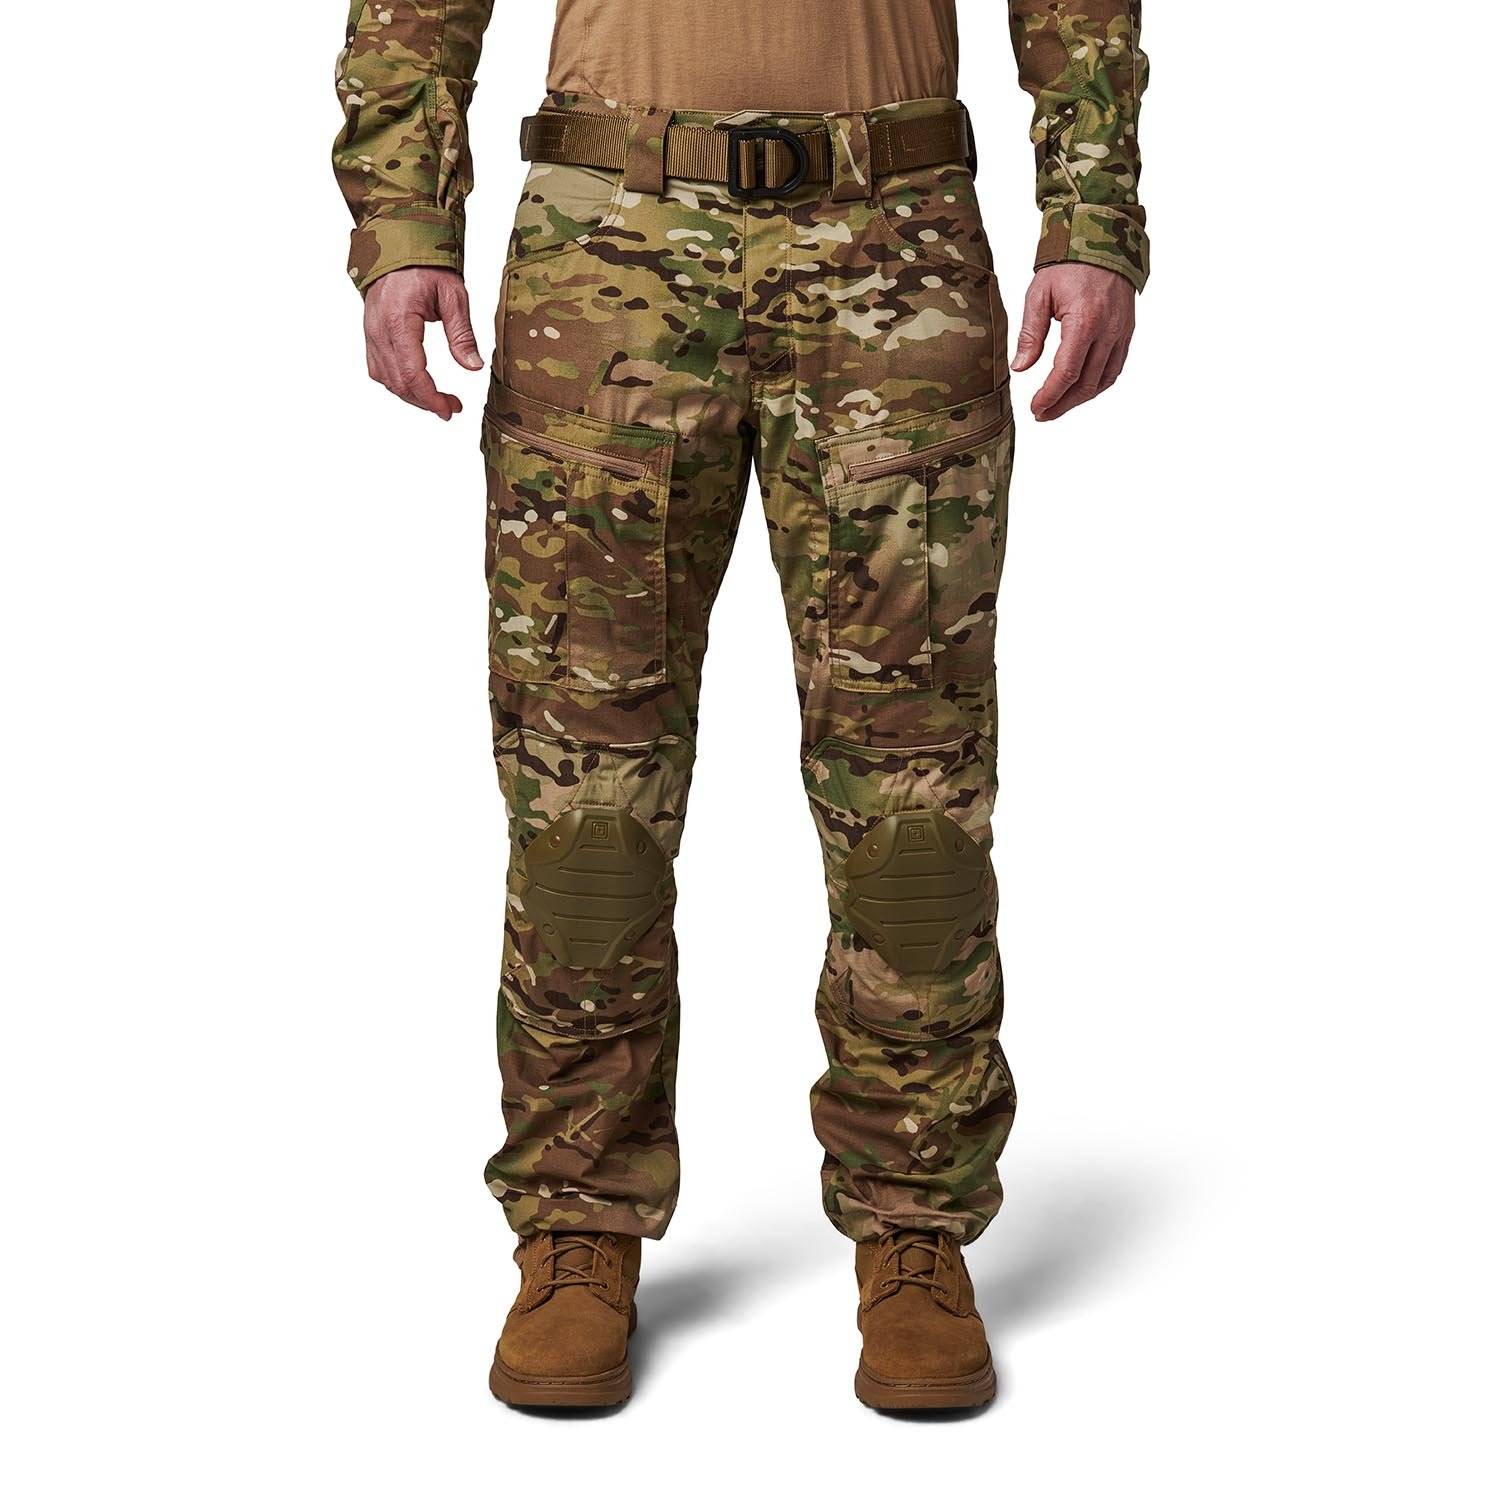 Buy CARWORNIC Gear Men's Assault Tactical Pants Lightweight Cotton Outdoor Military  Combat Cargo Trousers Khaki at Amazon.in